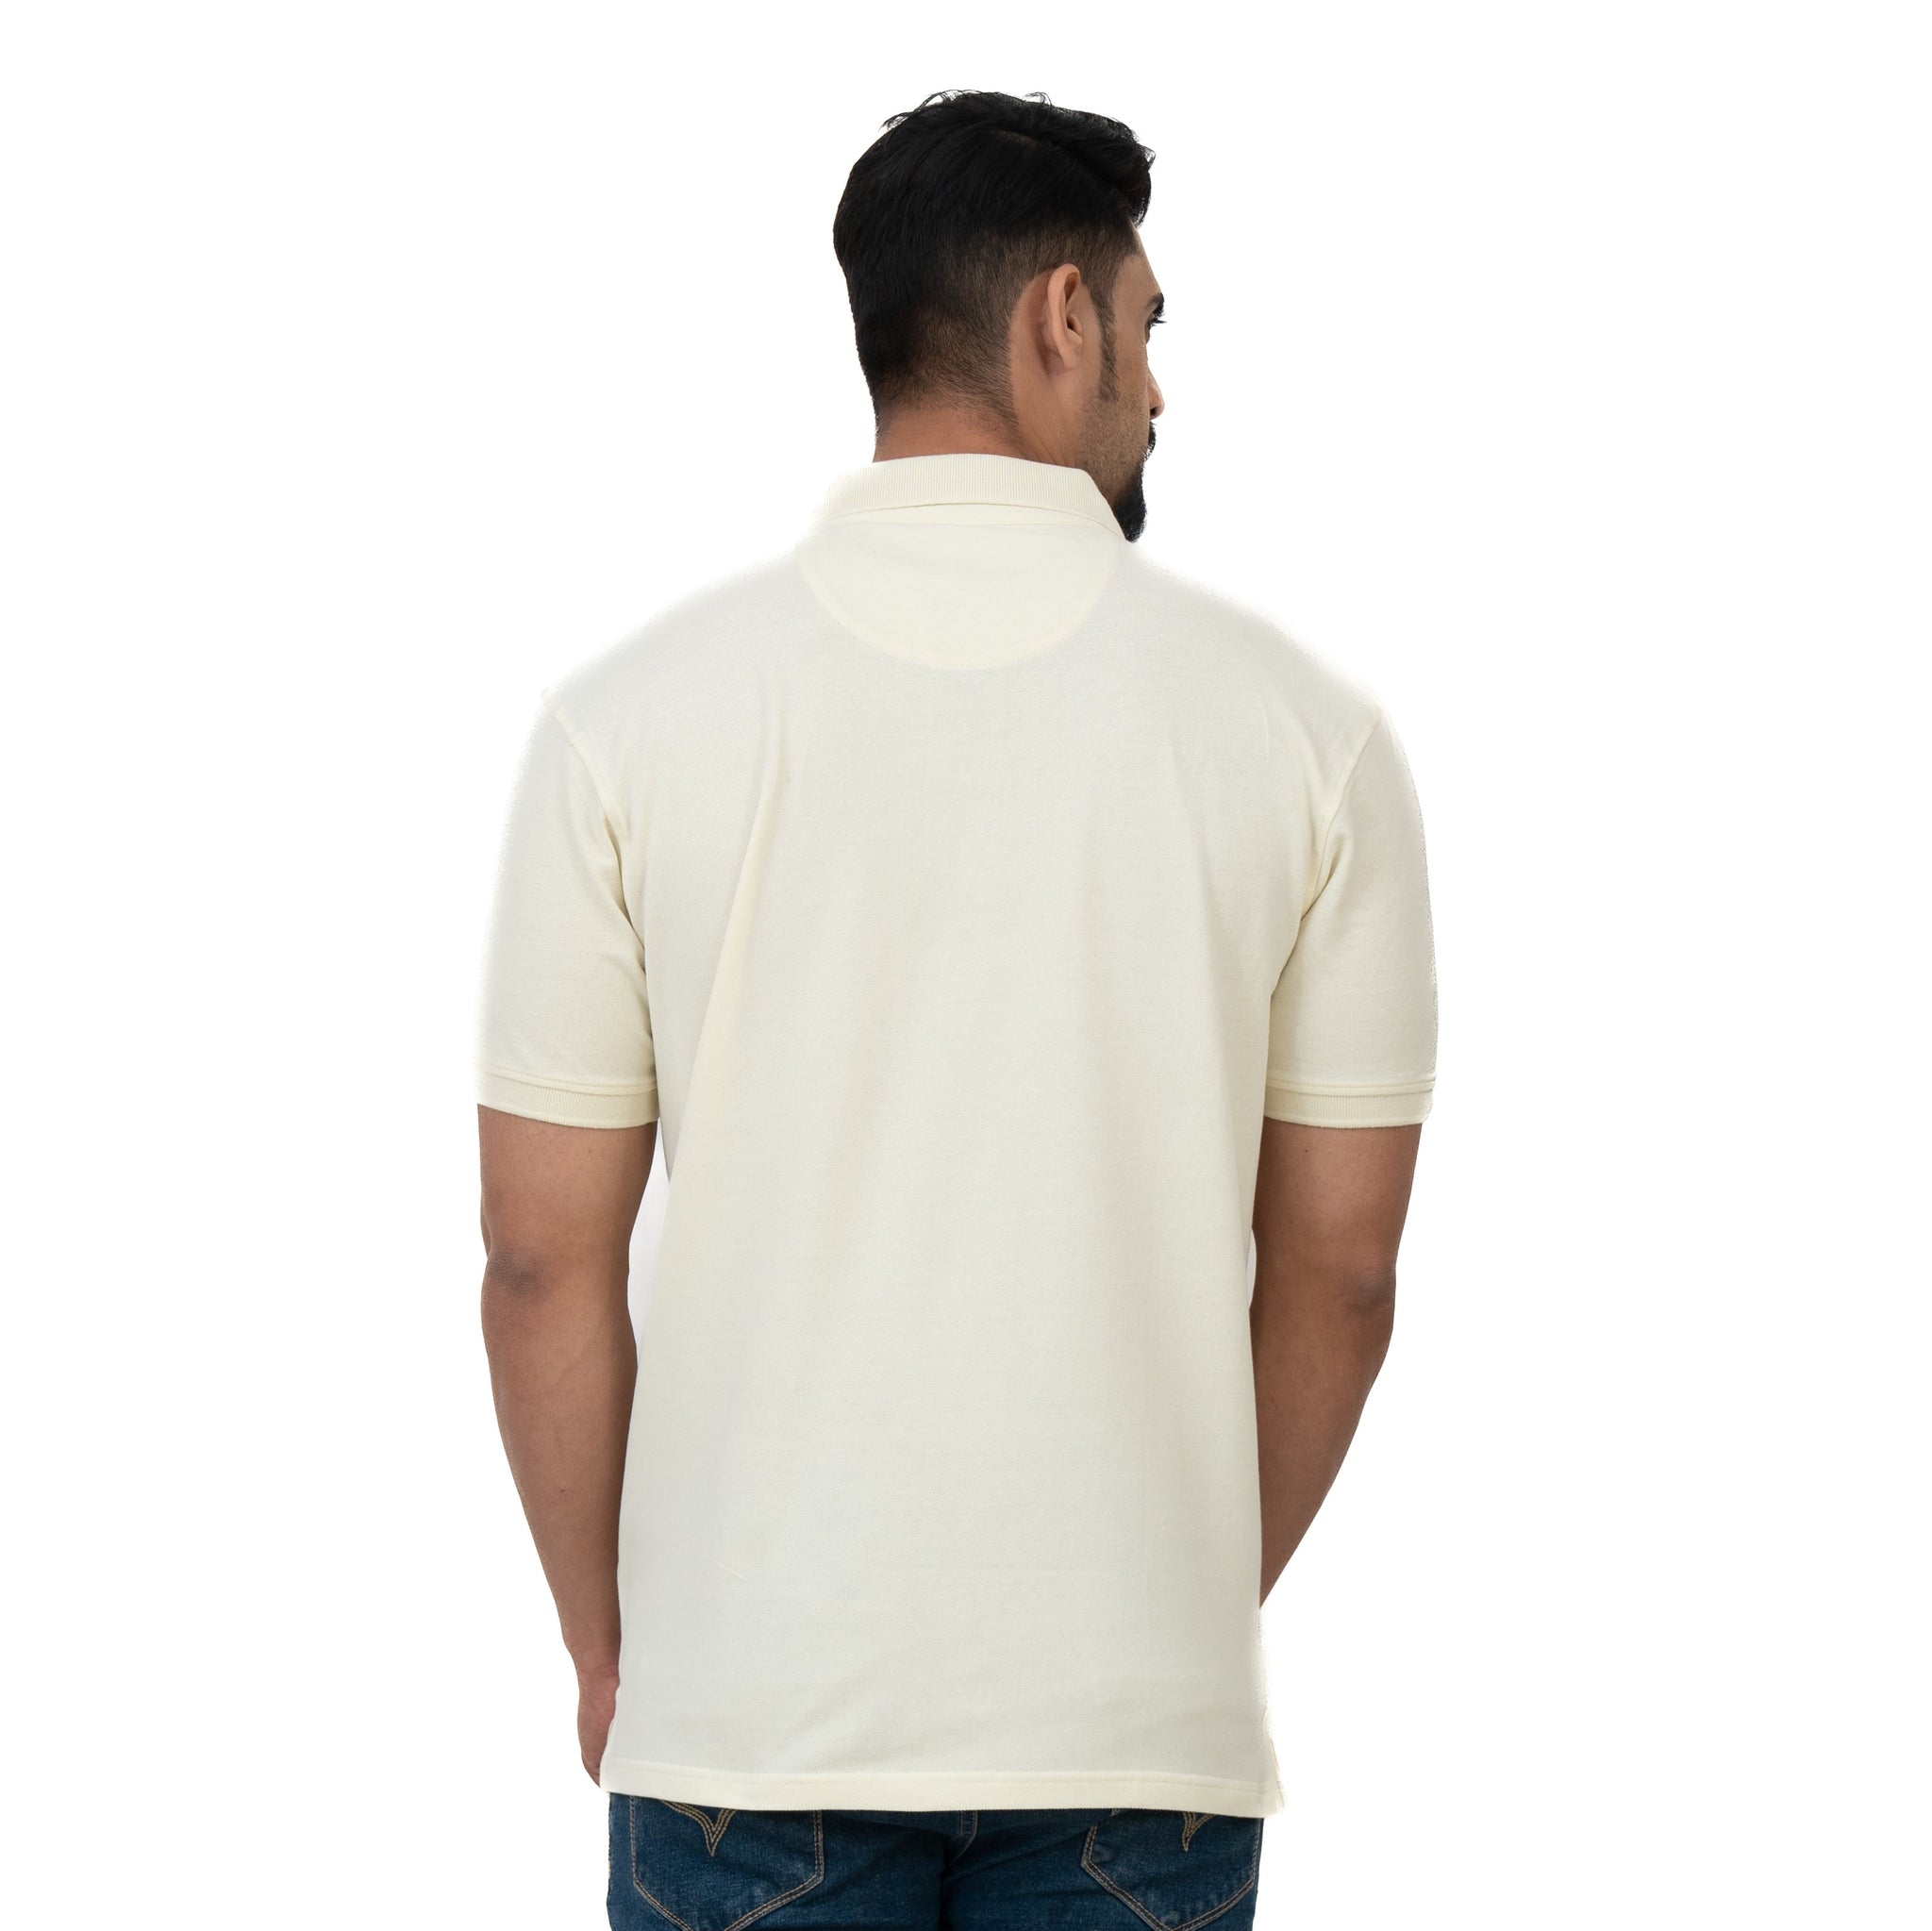 Cotstyle Cotton Fabrics Polo Short Length Plain Half Sleeve Casual & Daily Wear Men's T Shirts - Pack of 1 -  Transparent Yellow Colour